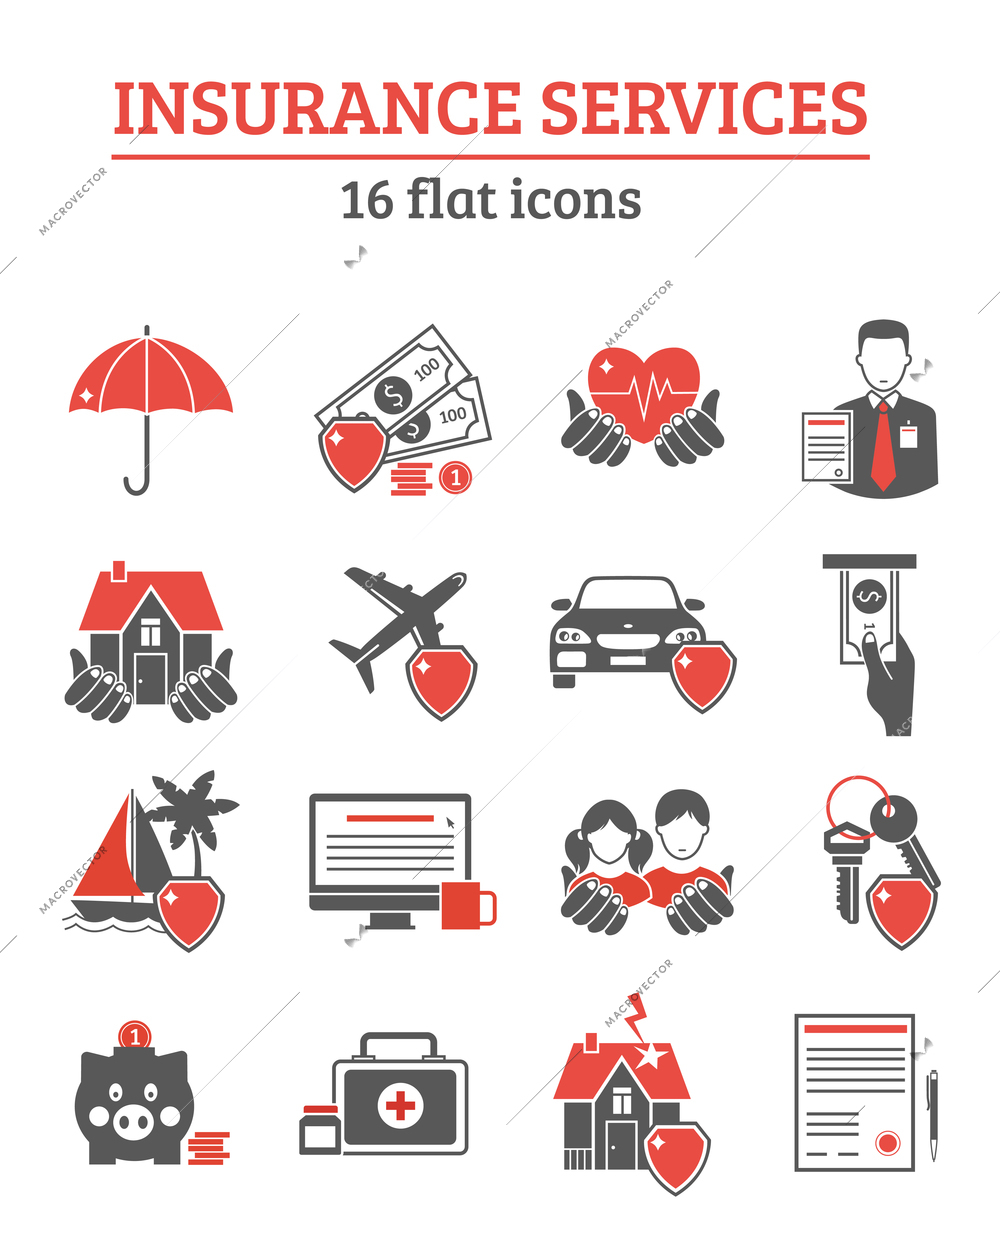 Insurance services red black icons set with health life and property insurance symbols flat isolated vector illustration